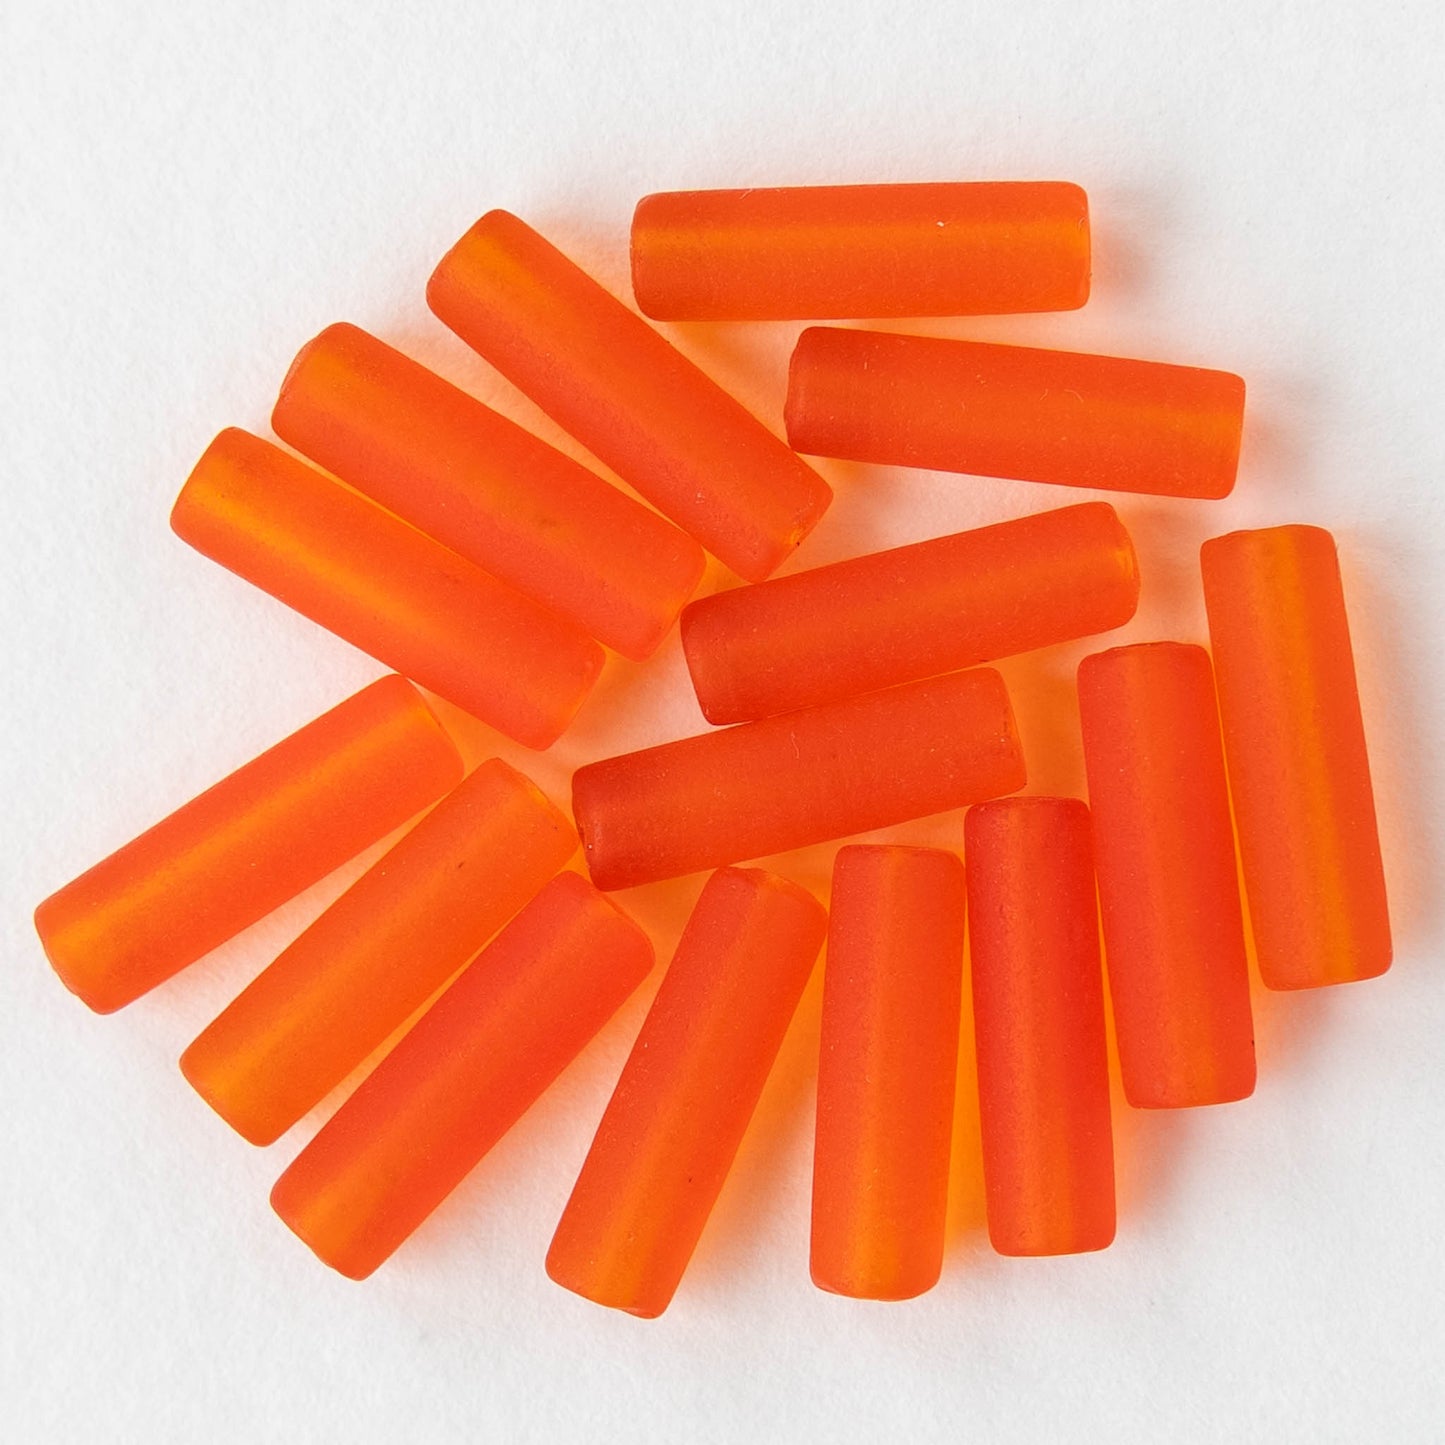 4x14mm Frosted Glass Tube Beads - Orange - 30 tubes